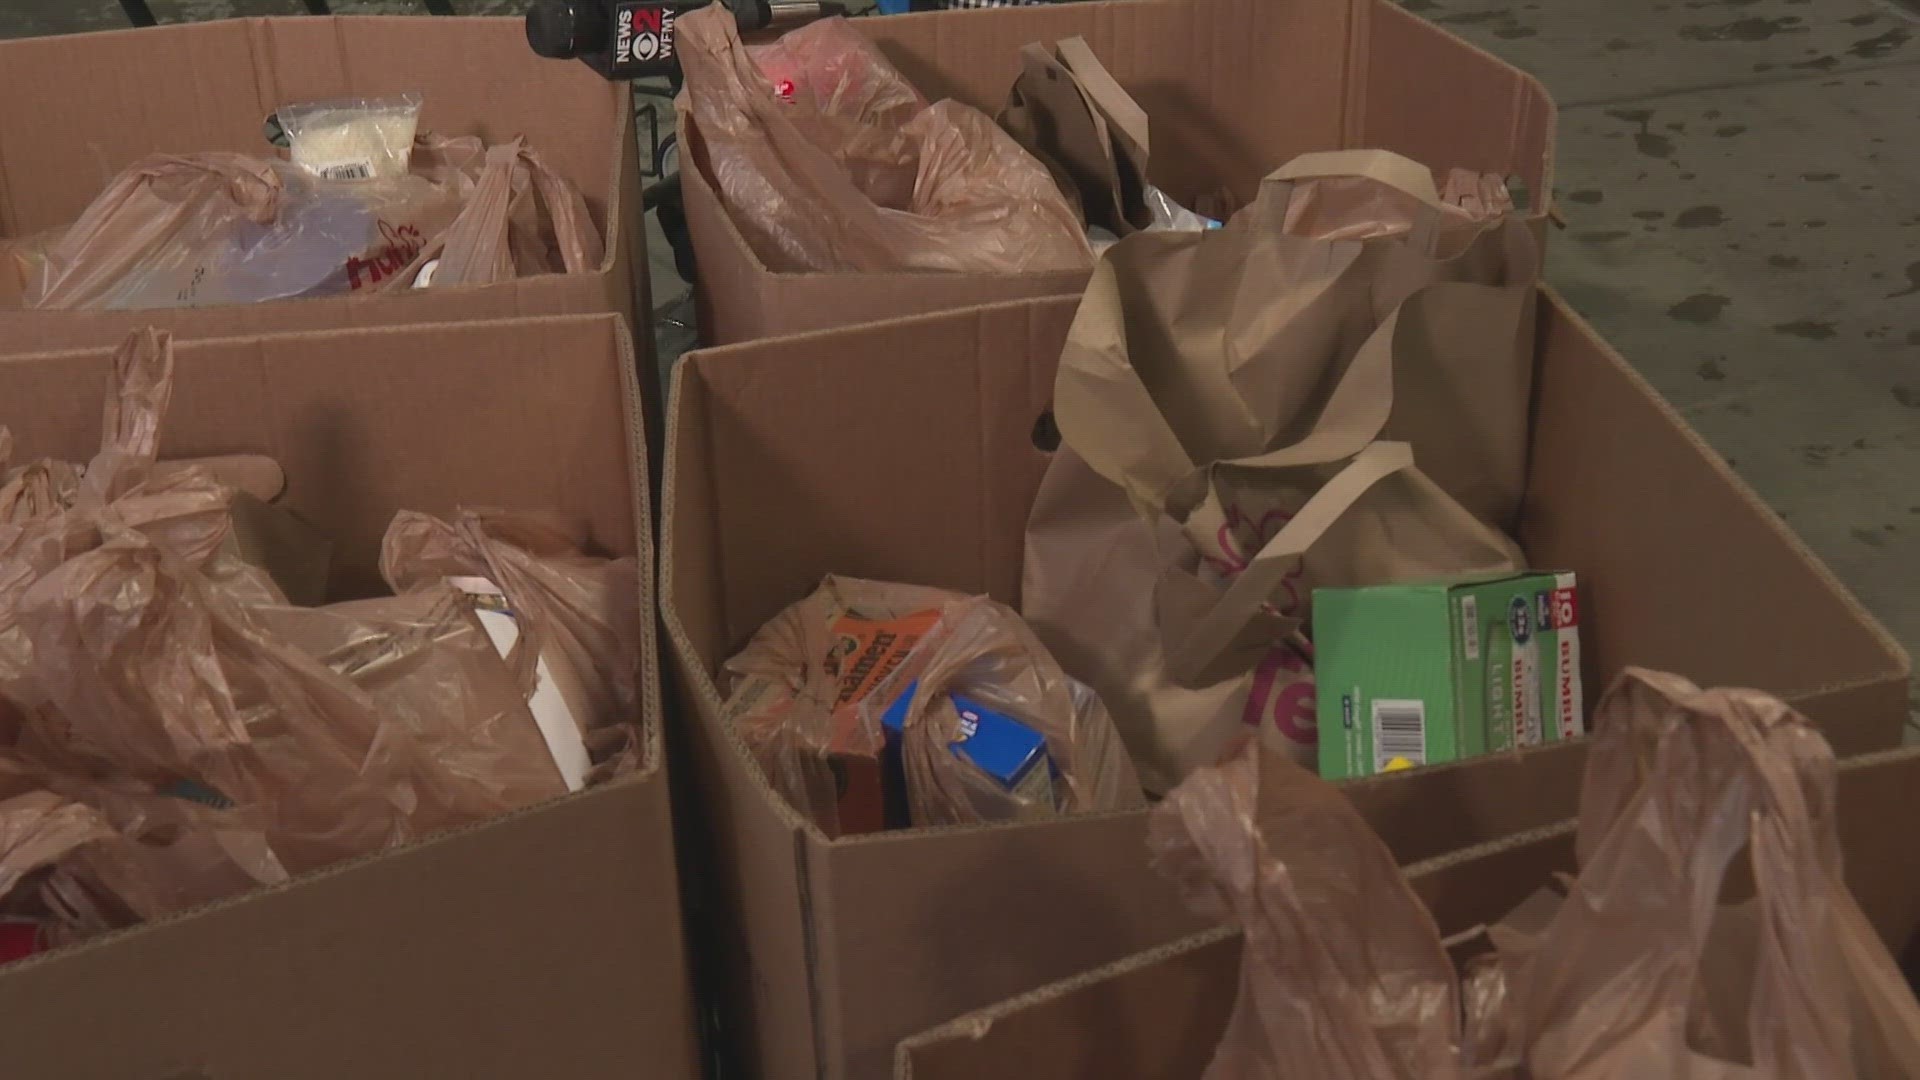 WFMY News 2 partnered with Greensboro Urban Ministry to make sure people have enough food.